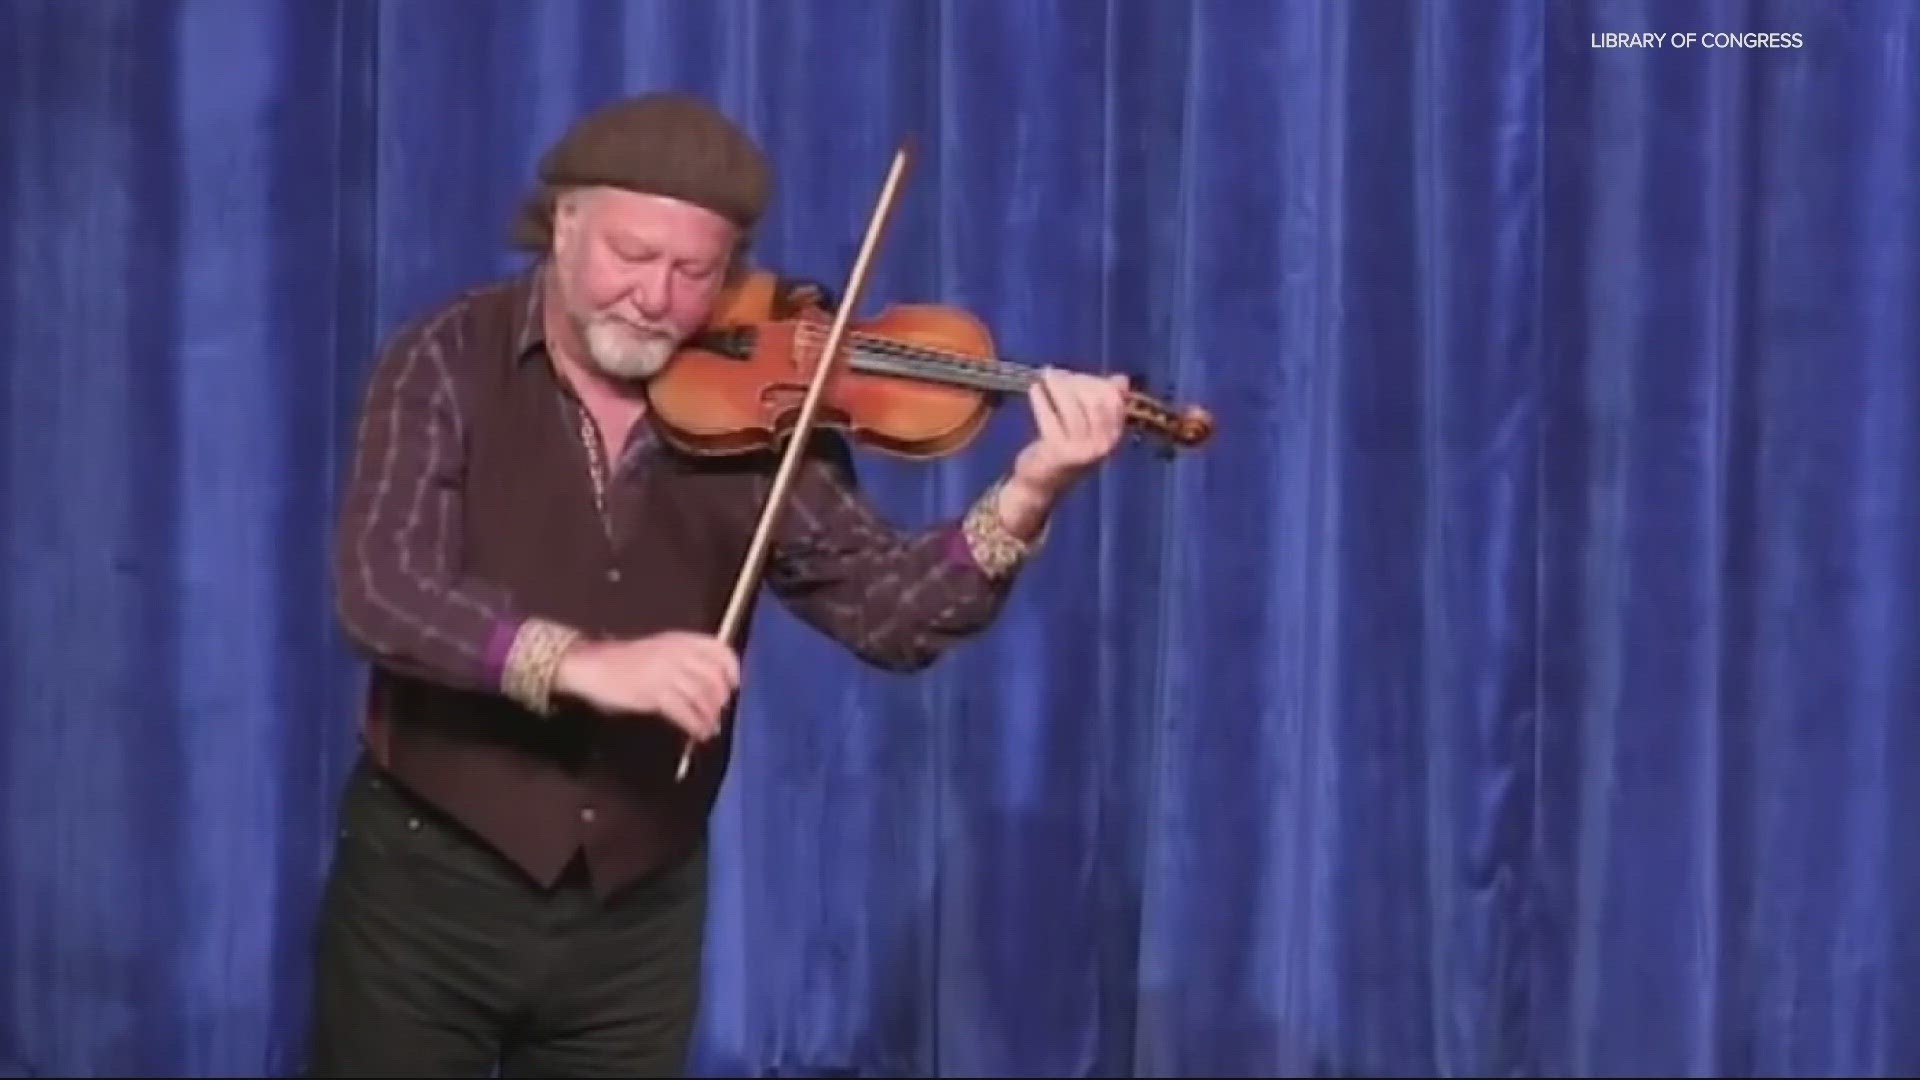 A world-class fiddler has his prized violin and bows back after they were stolen from his rental car while playing a show in Portland last month.